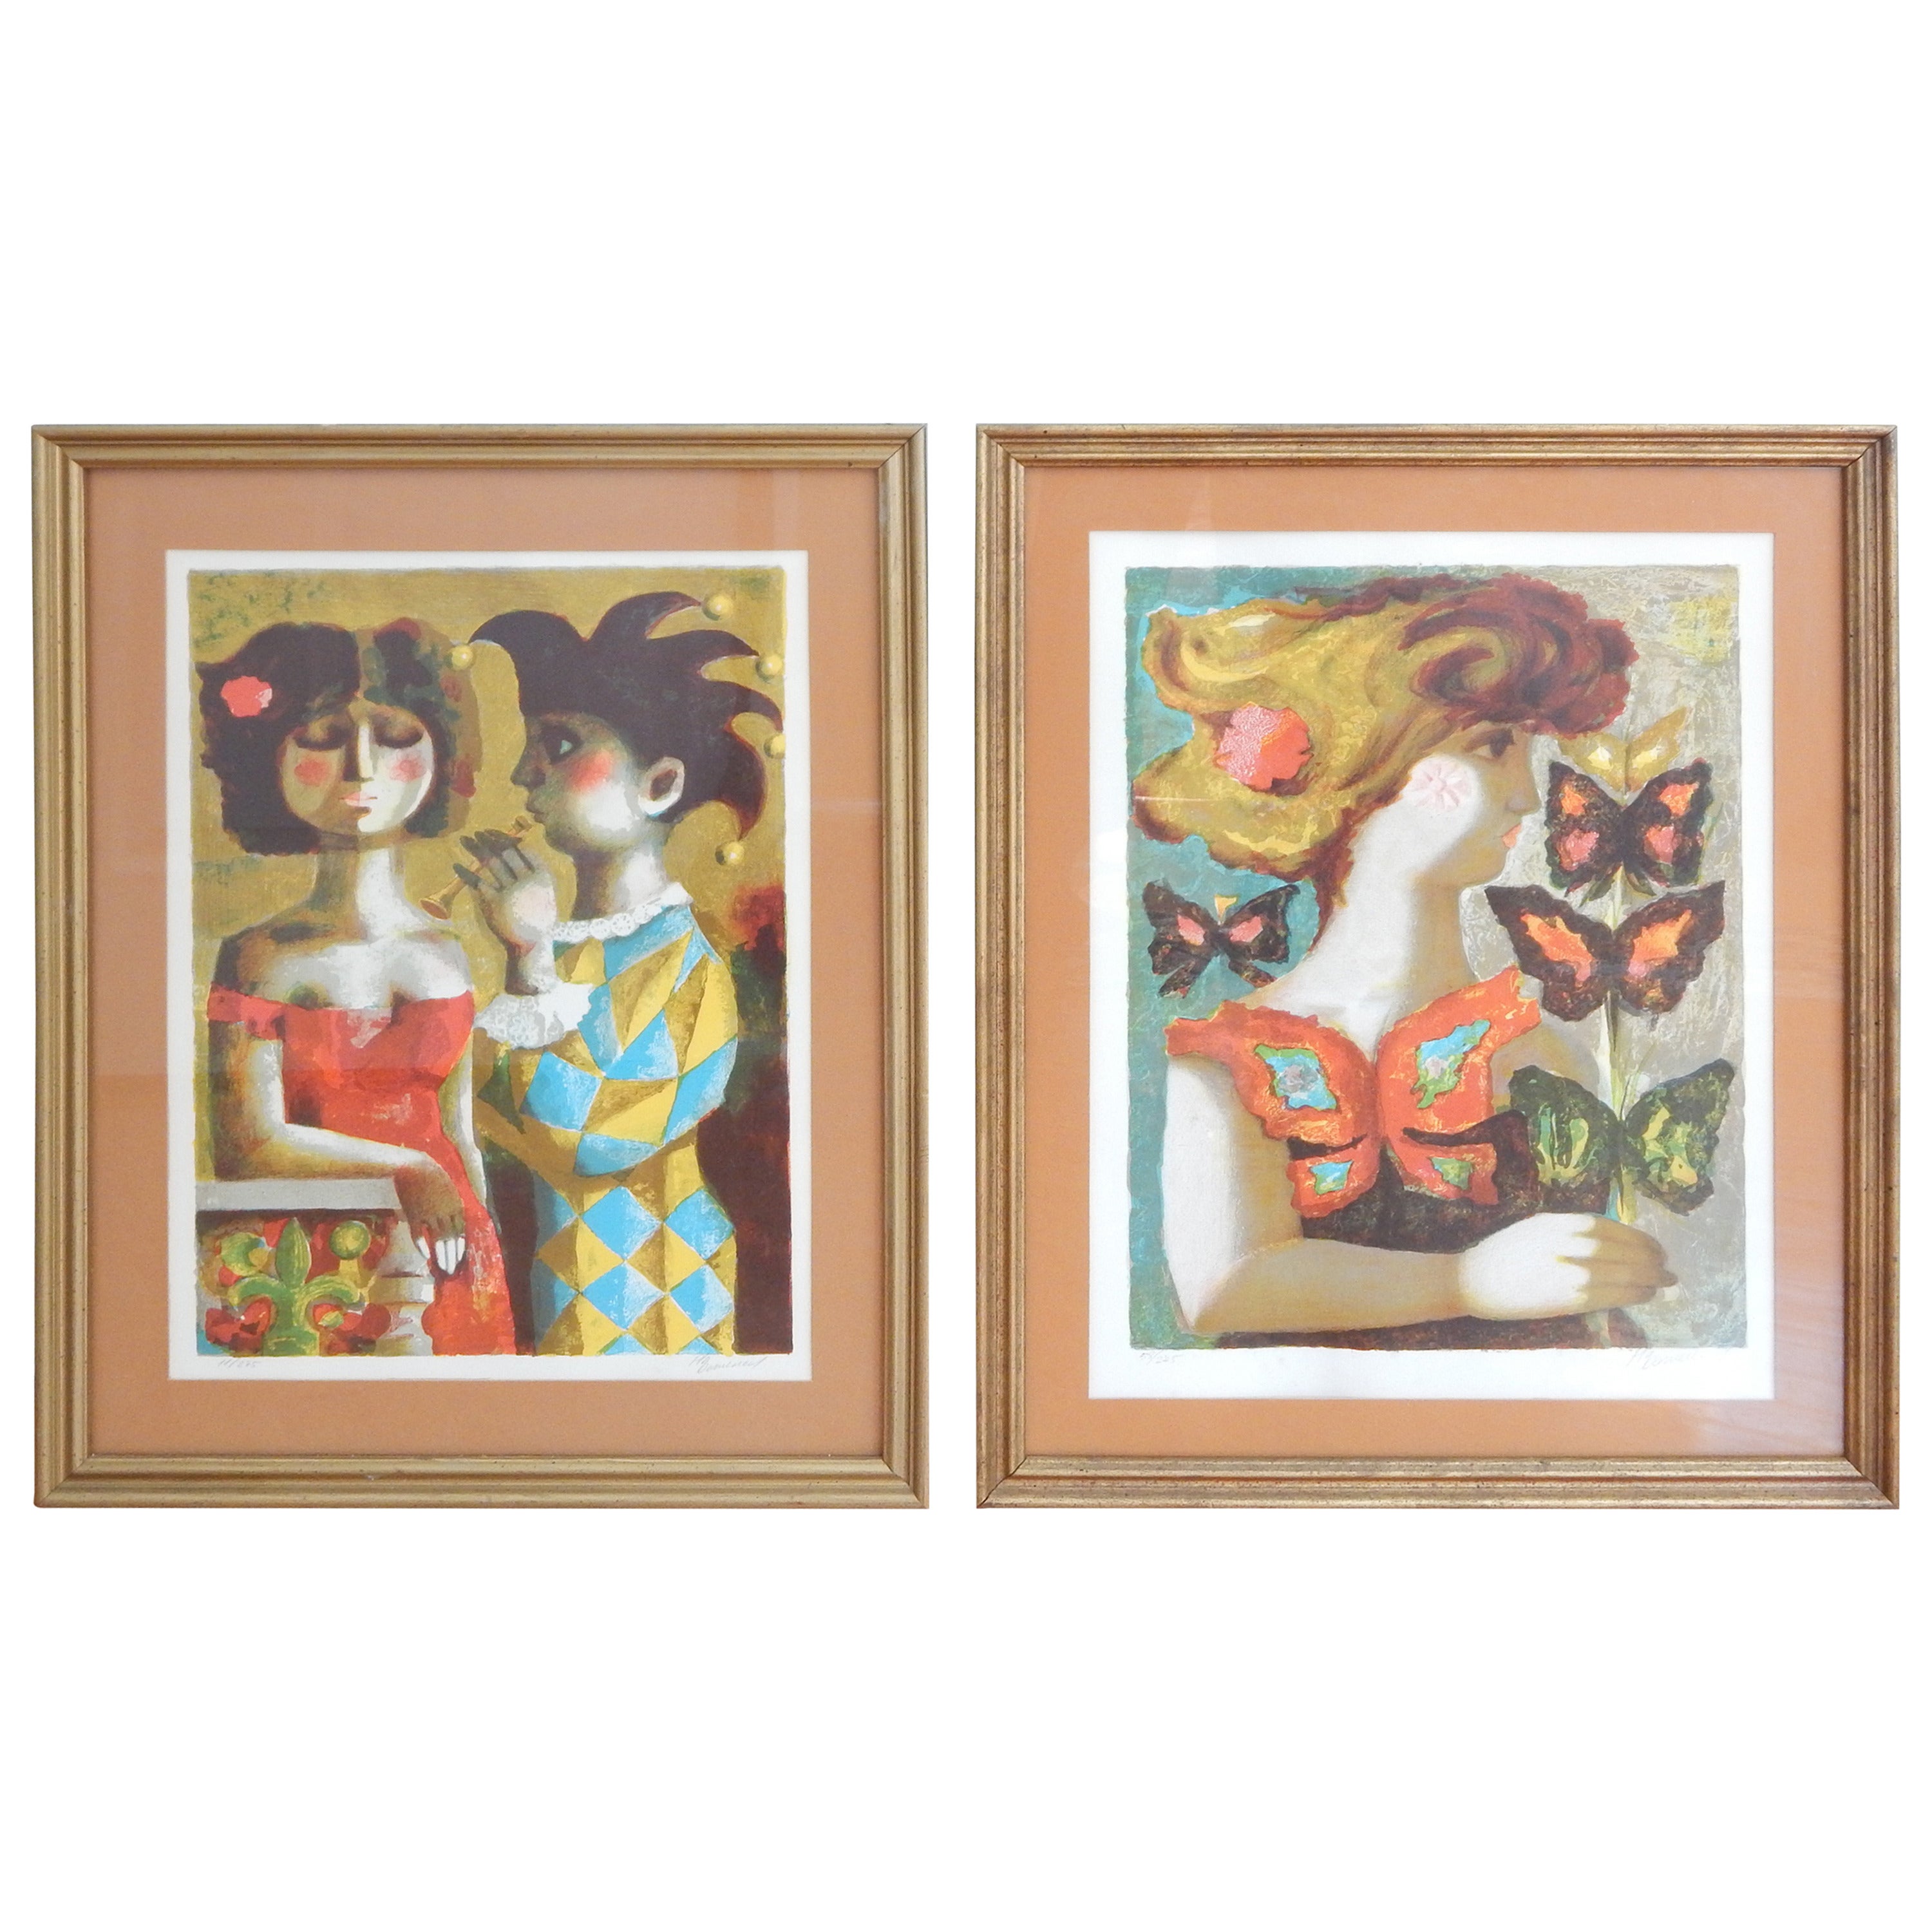 Pair of Framed Signed and Numbered Lithographs by Pla Domenech